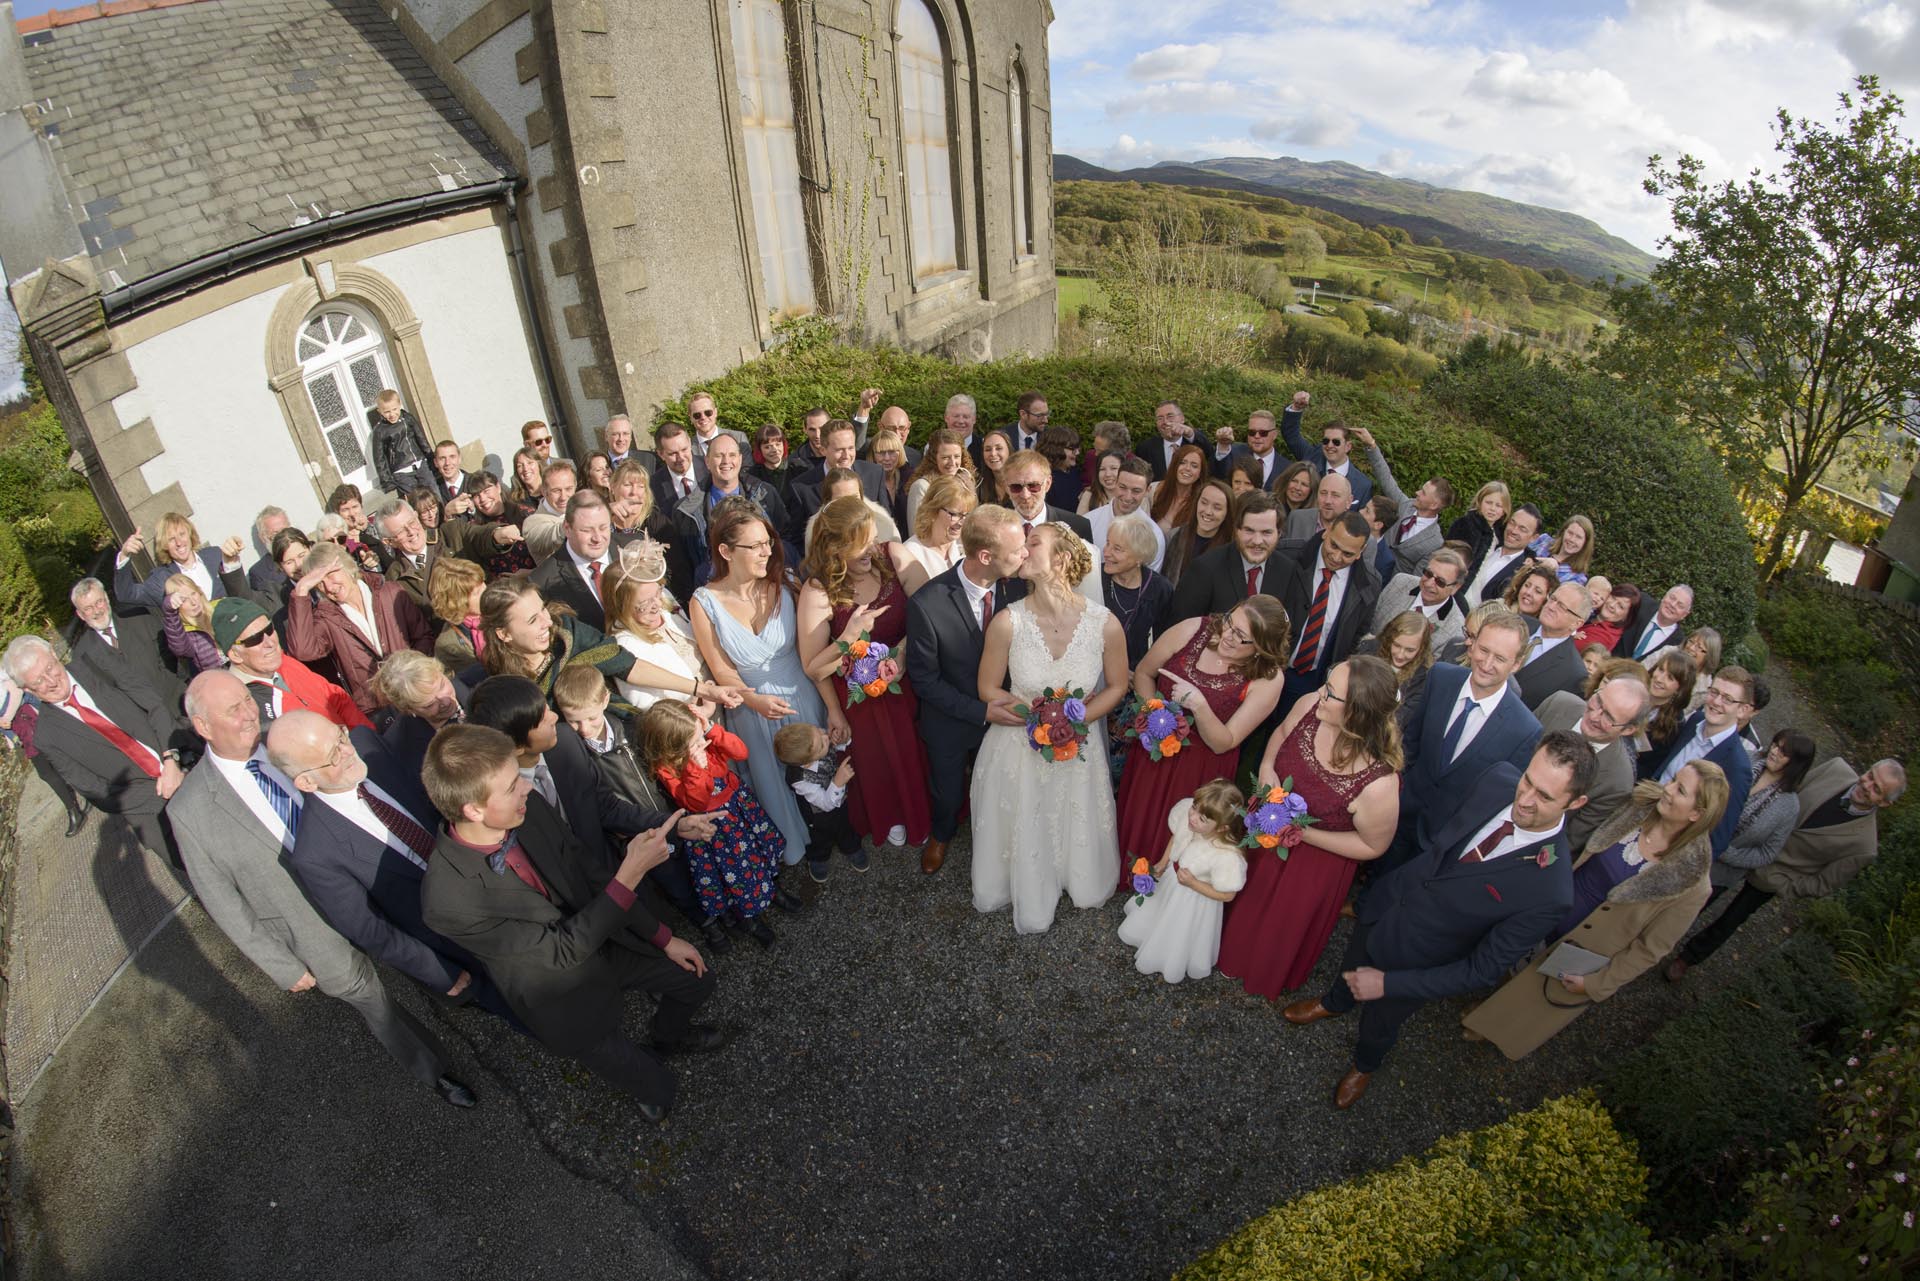 Dave and Hannah Wedding 27 Oct 2018 AKP 144831 (1)a